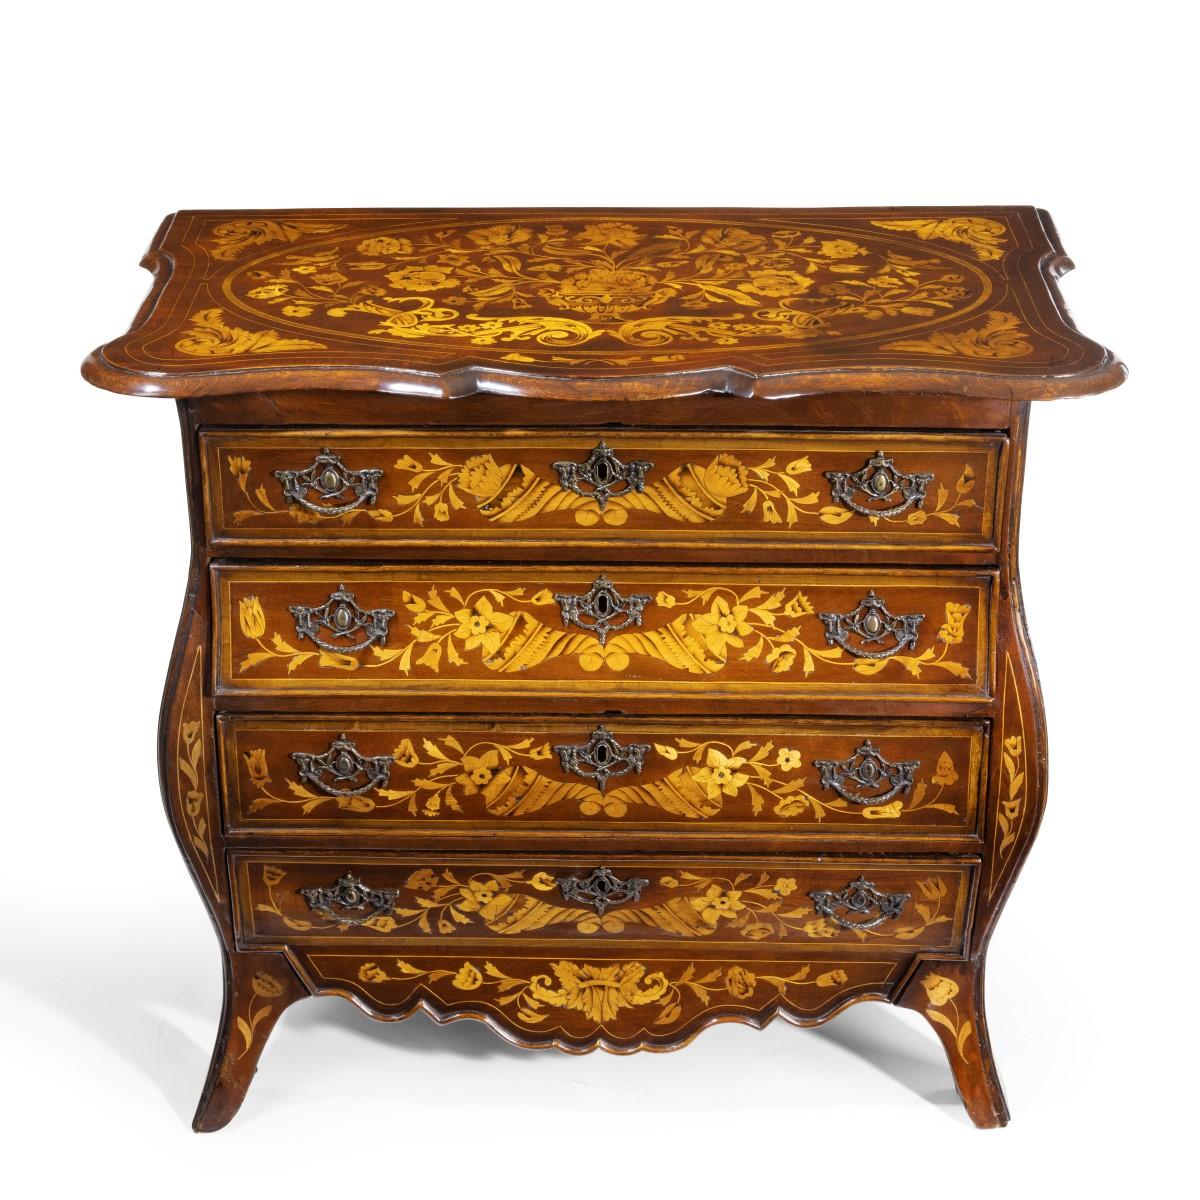 Period Dutch Mahogany Four-Drawer Bombe Marquetry Commode, 1800 For Sale 2